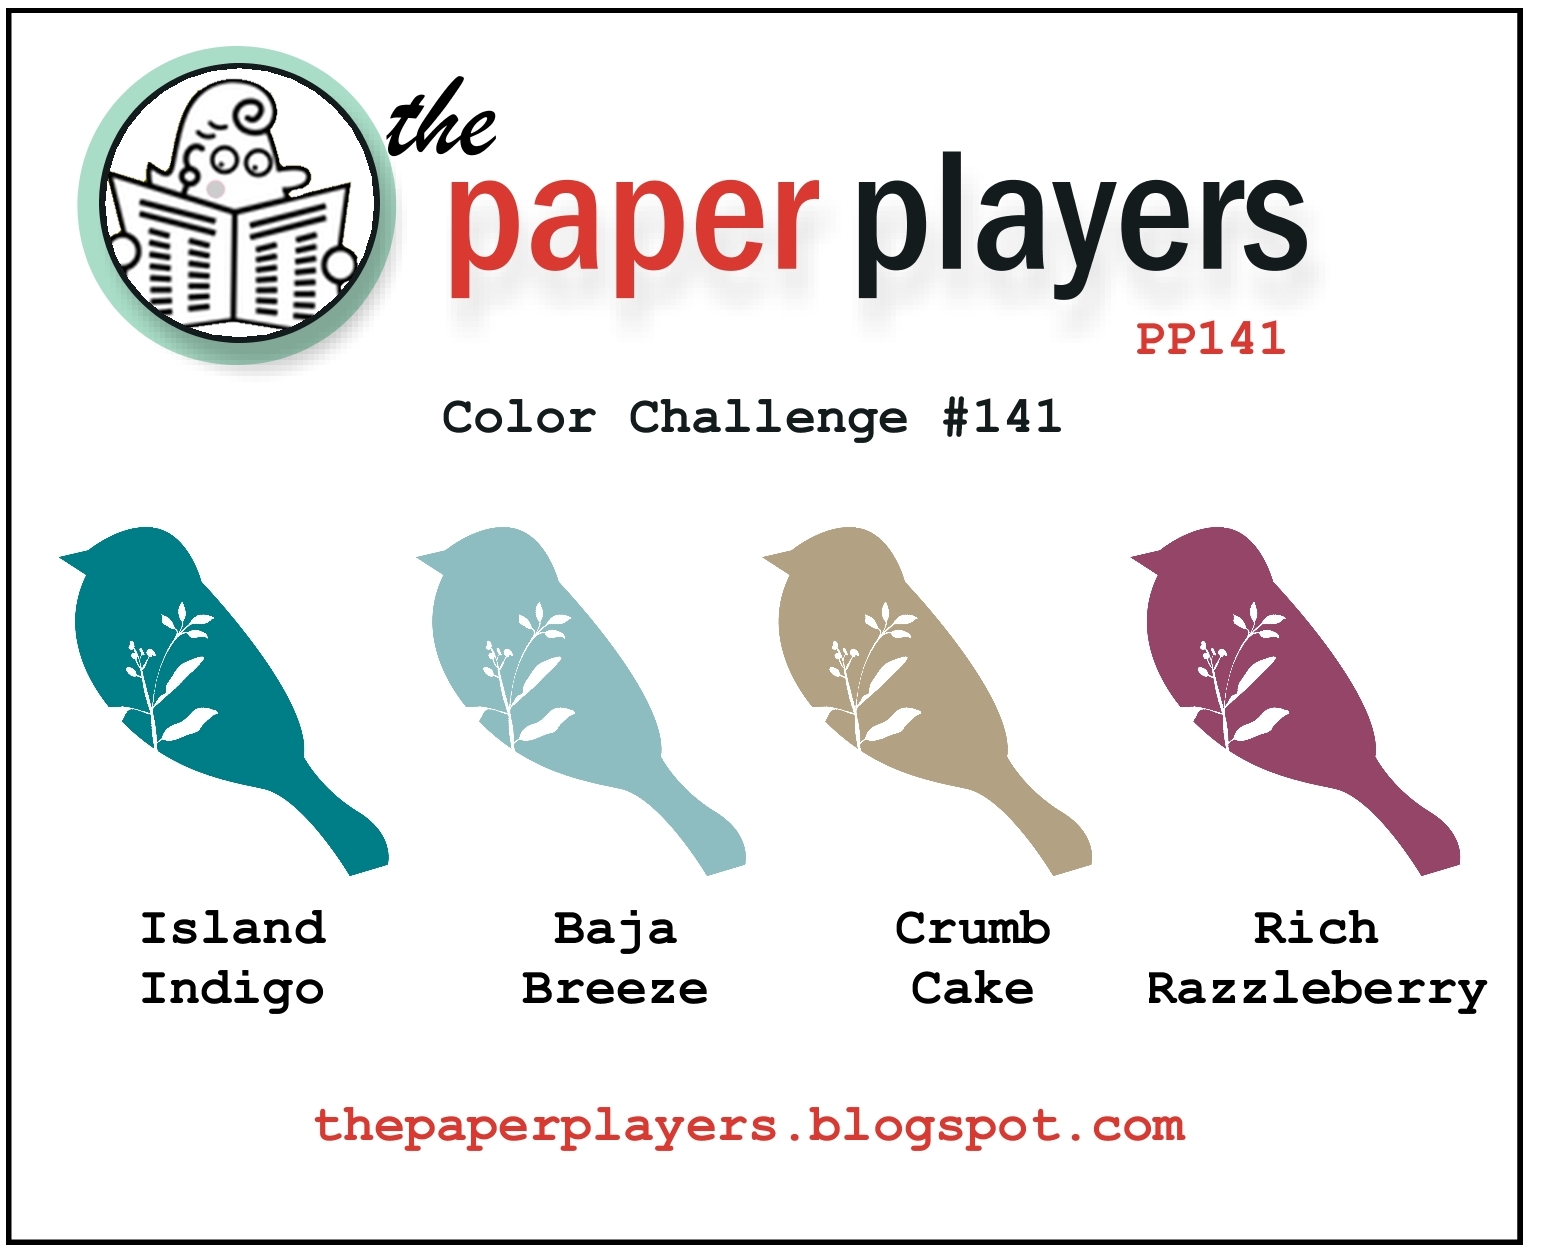 @Player_141. Paper plays